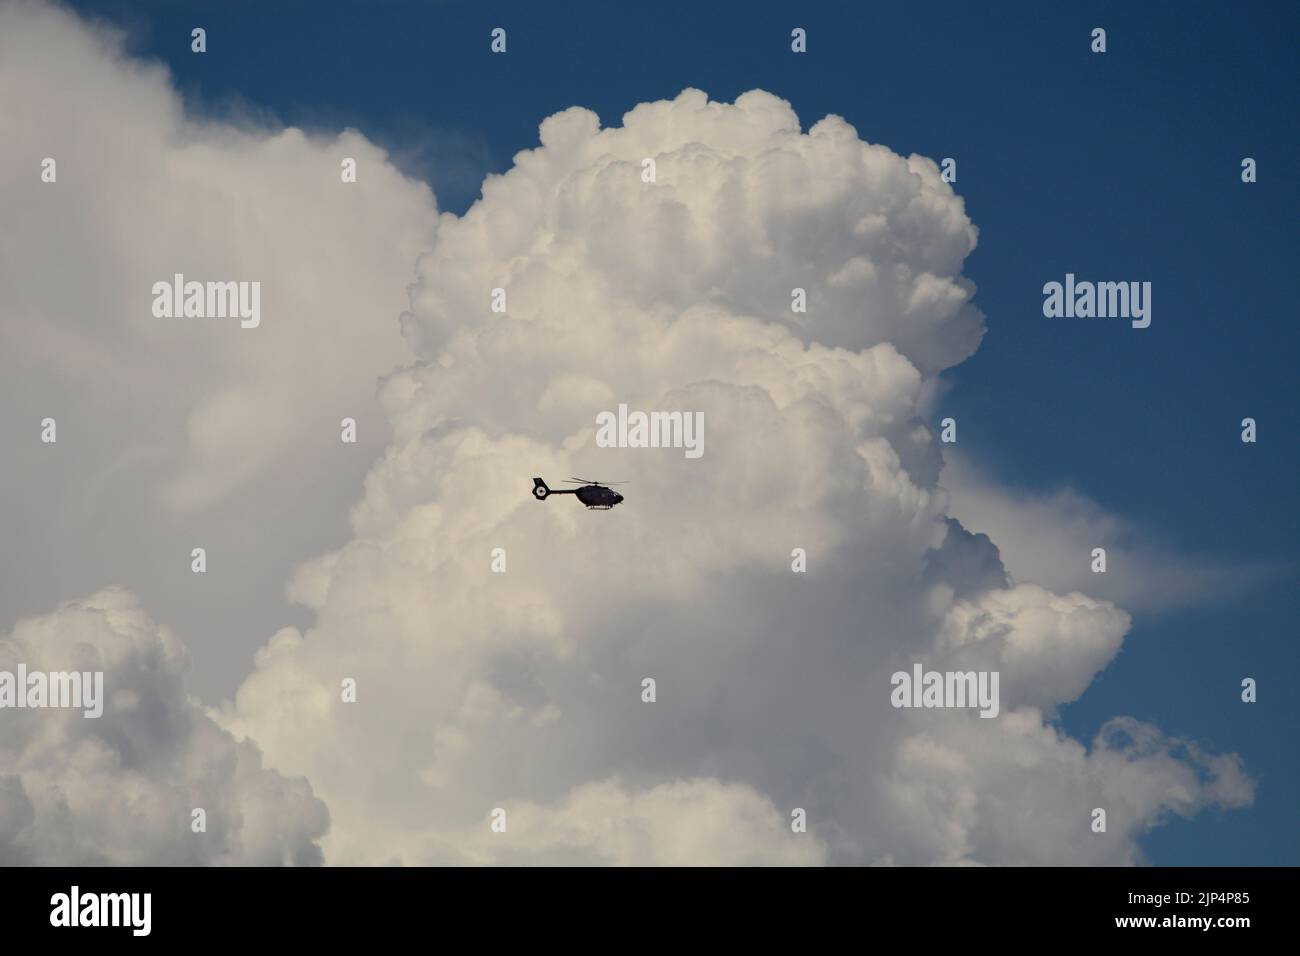 An Airbus Deutschland MBB-BK helicopter flies in front of towering cumulus clouds over Santa Fe, New Mexico. Stock Photo